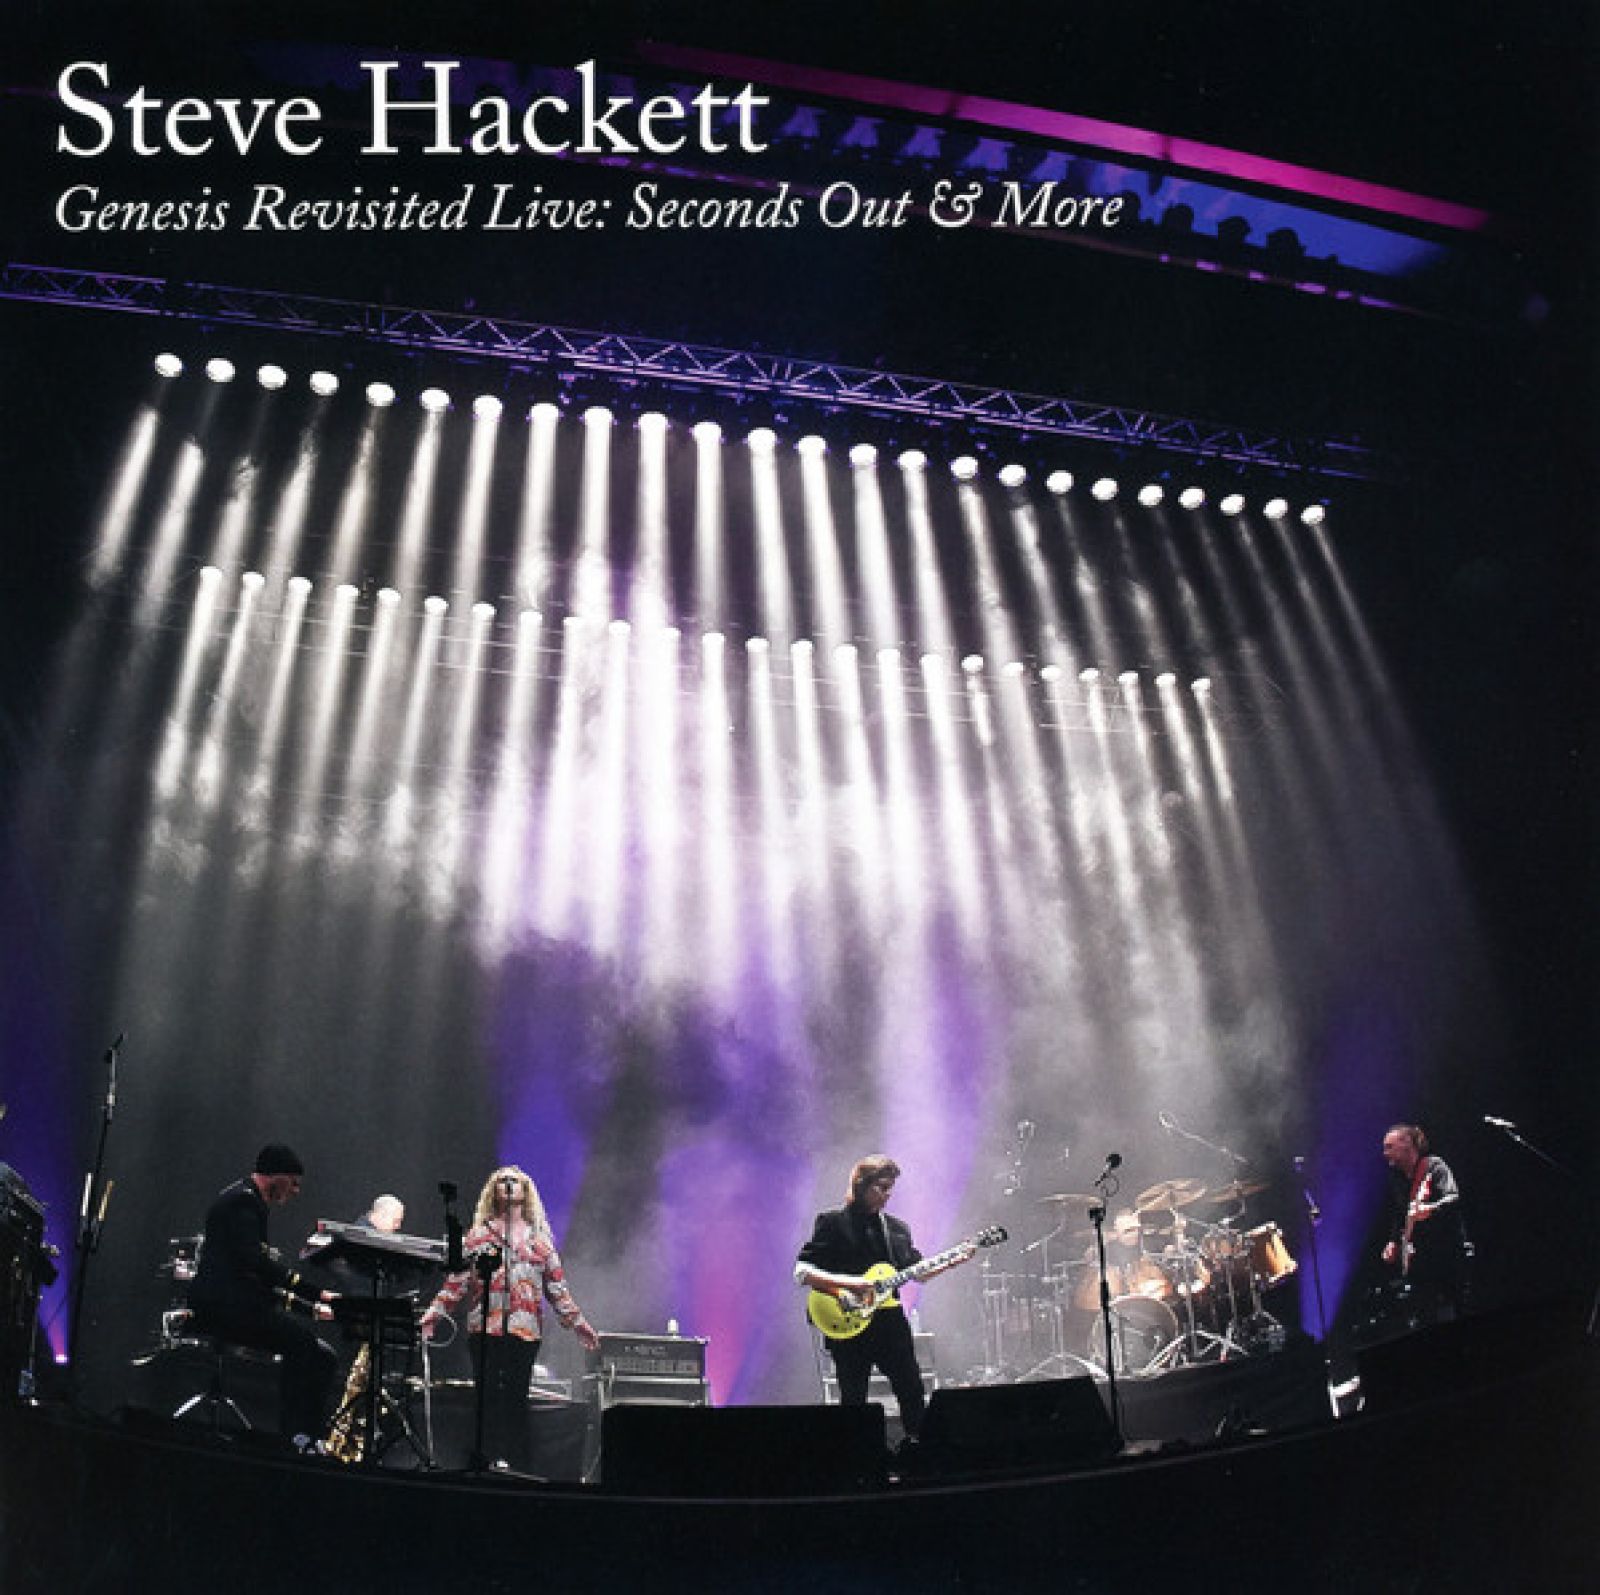 Виниловая пластинка Hackett, Steve, Genesis Revisited Live: Seconds Out & More (Box) (0194399984116) виниловая пластинка inside out music steve hackett – genesis revisited ii 4lp box 2cd